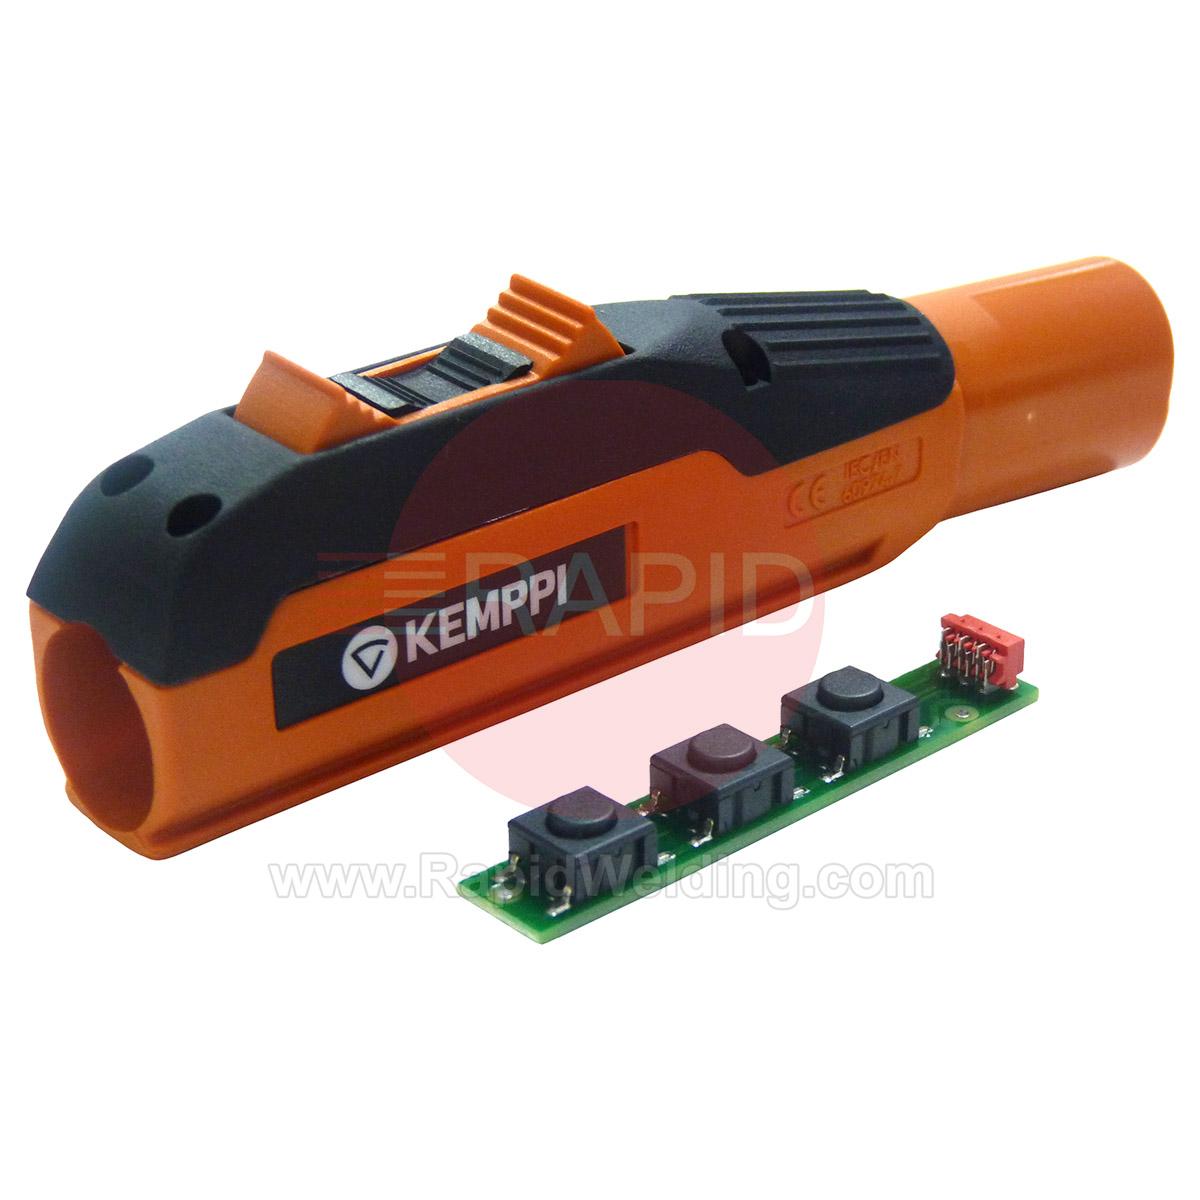 6185478  Kemppi RTC 20 Linear Torch Amperage Control (For TTC TIG Torches)